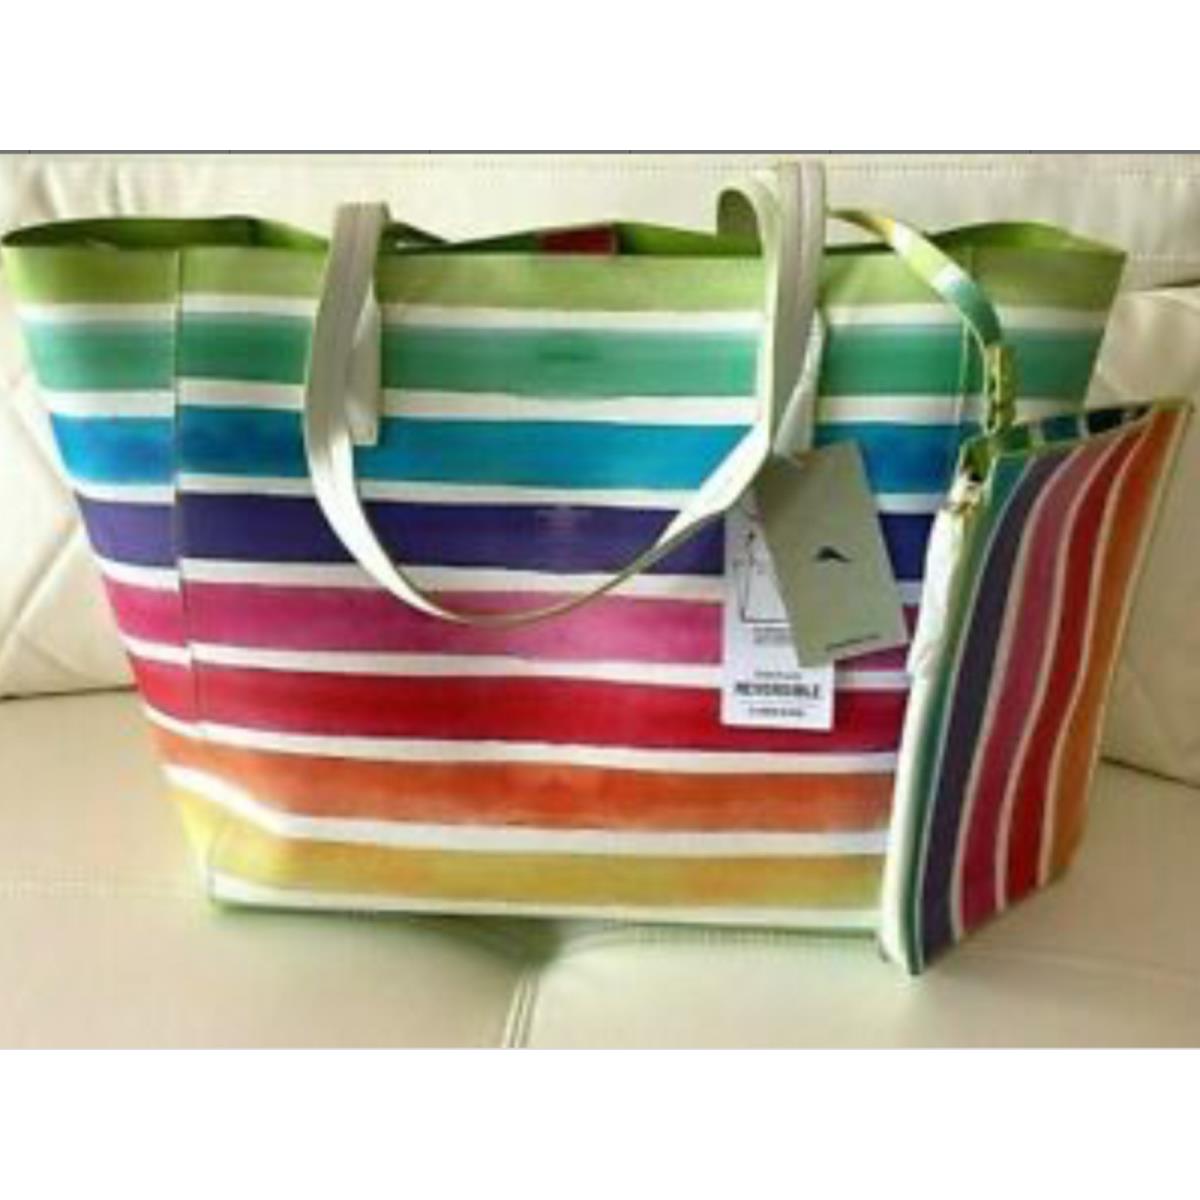 Tommy Bahama 2-PC Set Rainbow Stripes LG Reversible Tote Bag Organizer Pouch